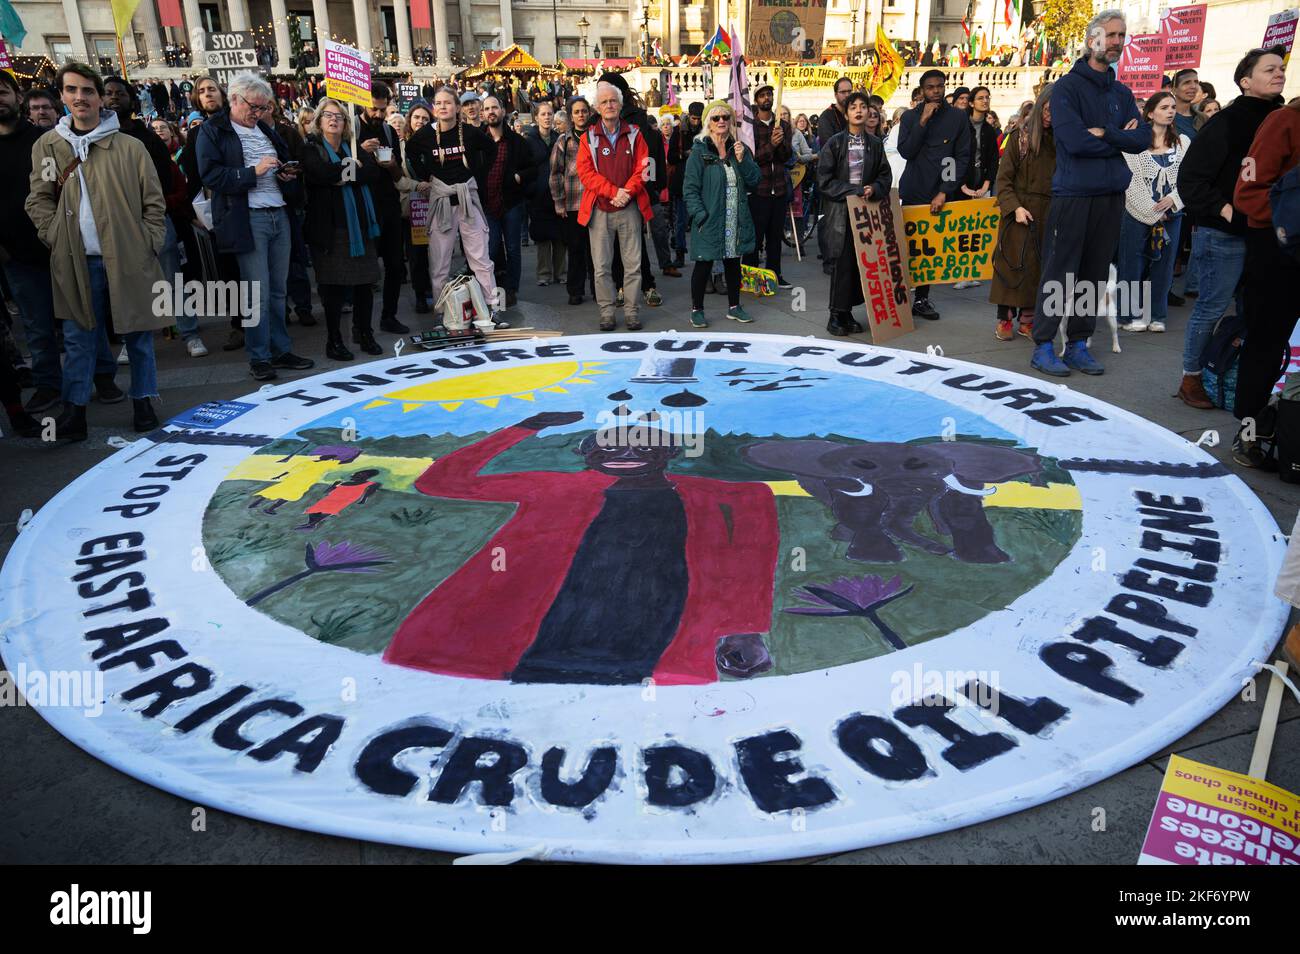 On November 12th 2022 protesters demonstrate for climate justice in Central London as the COP 27 talks finish in Egypt., with a large round banner cal Stock Photo